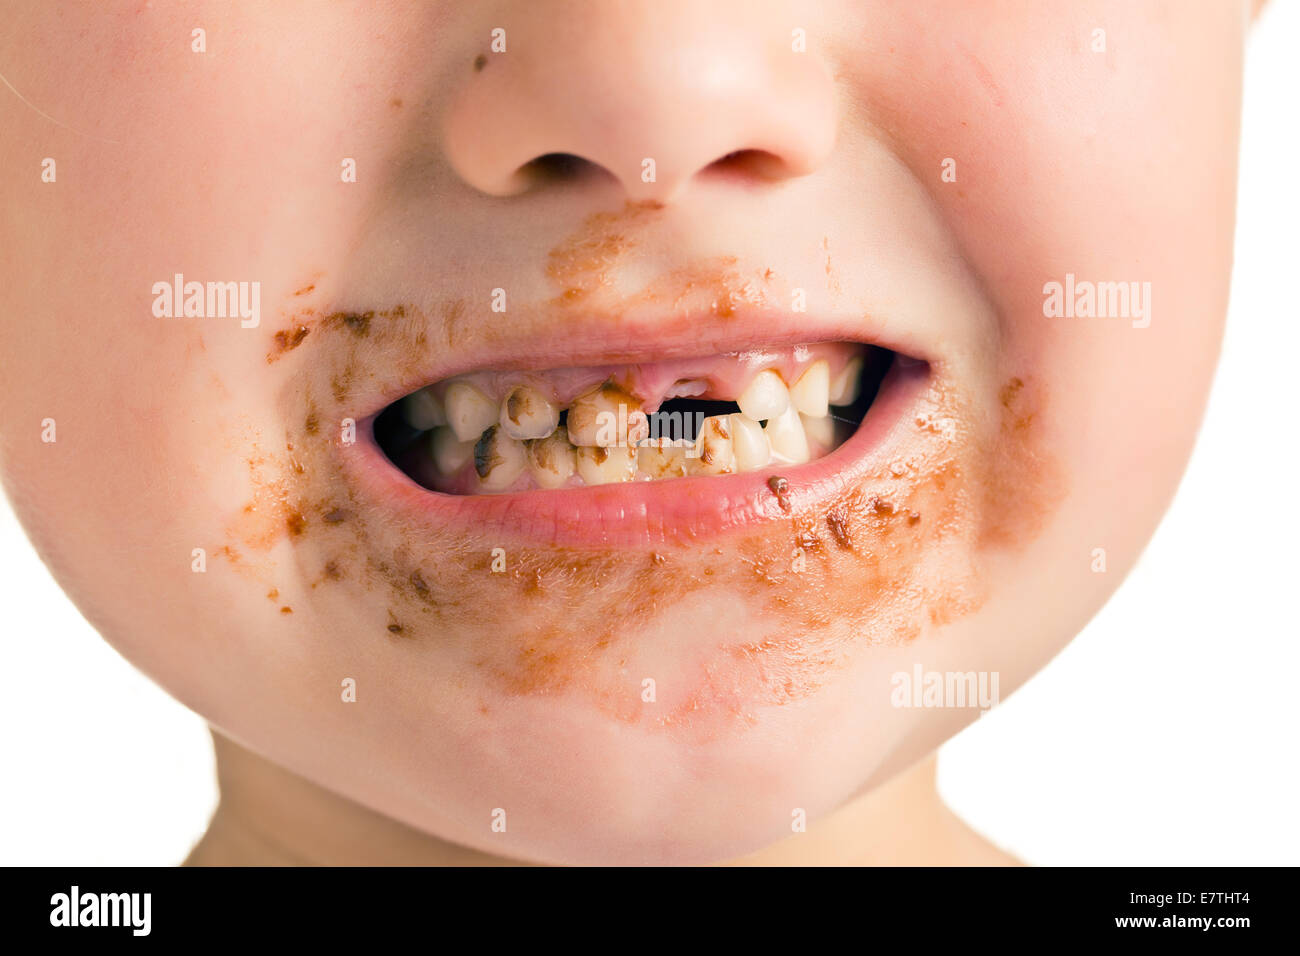 the child with a dirty mouth and missing tooth Stock Photo